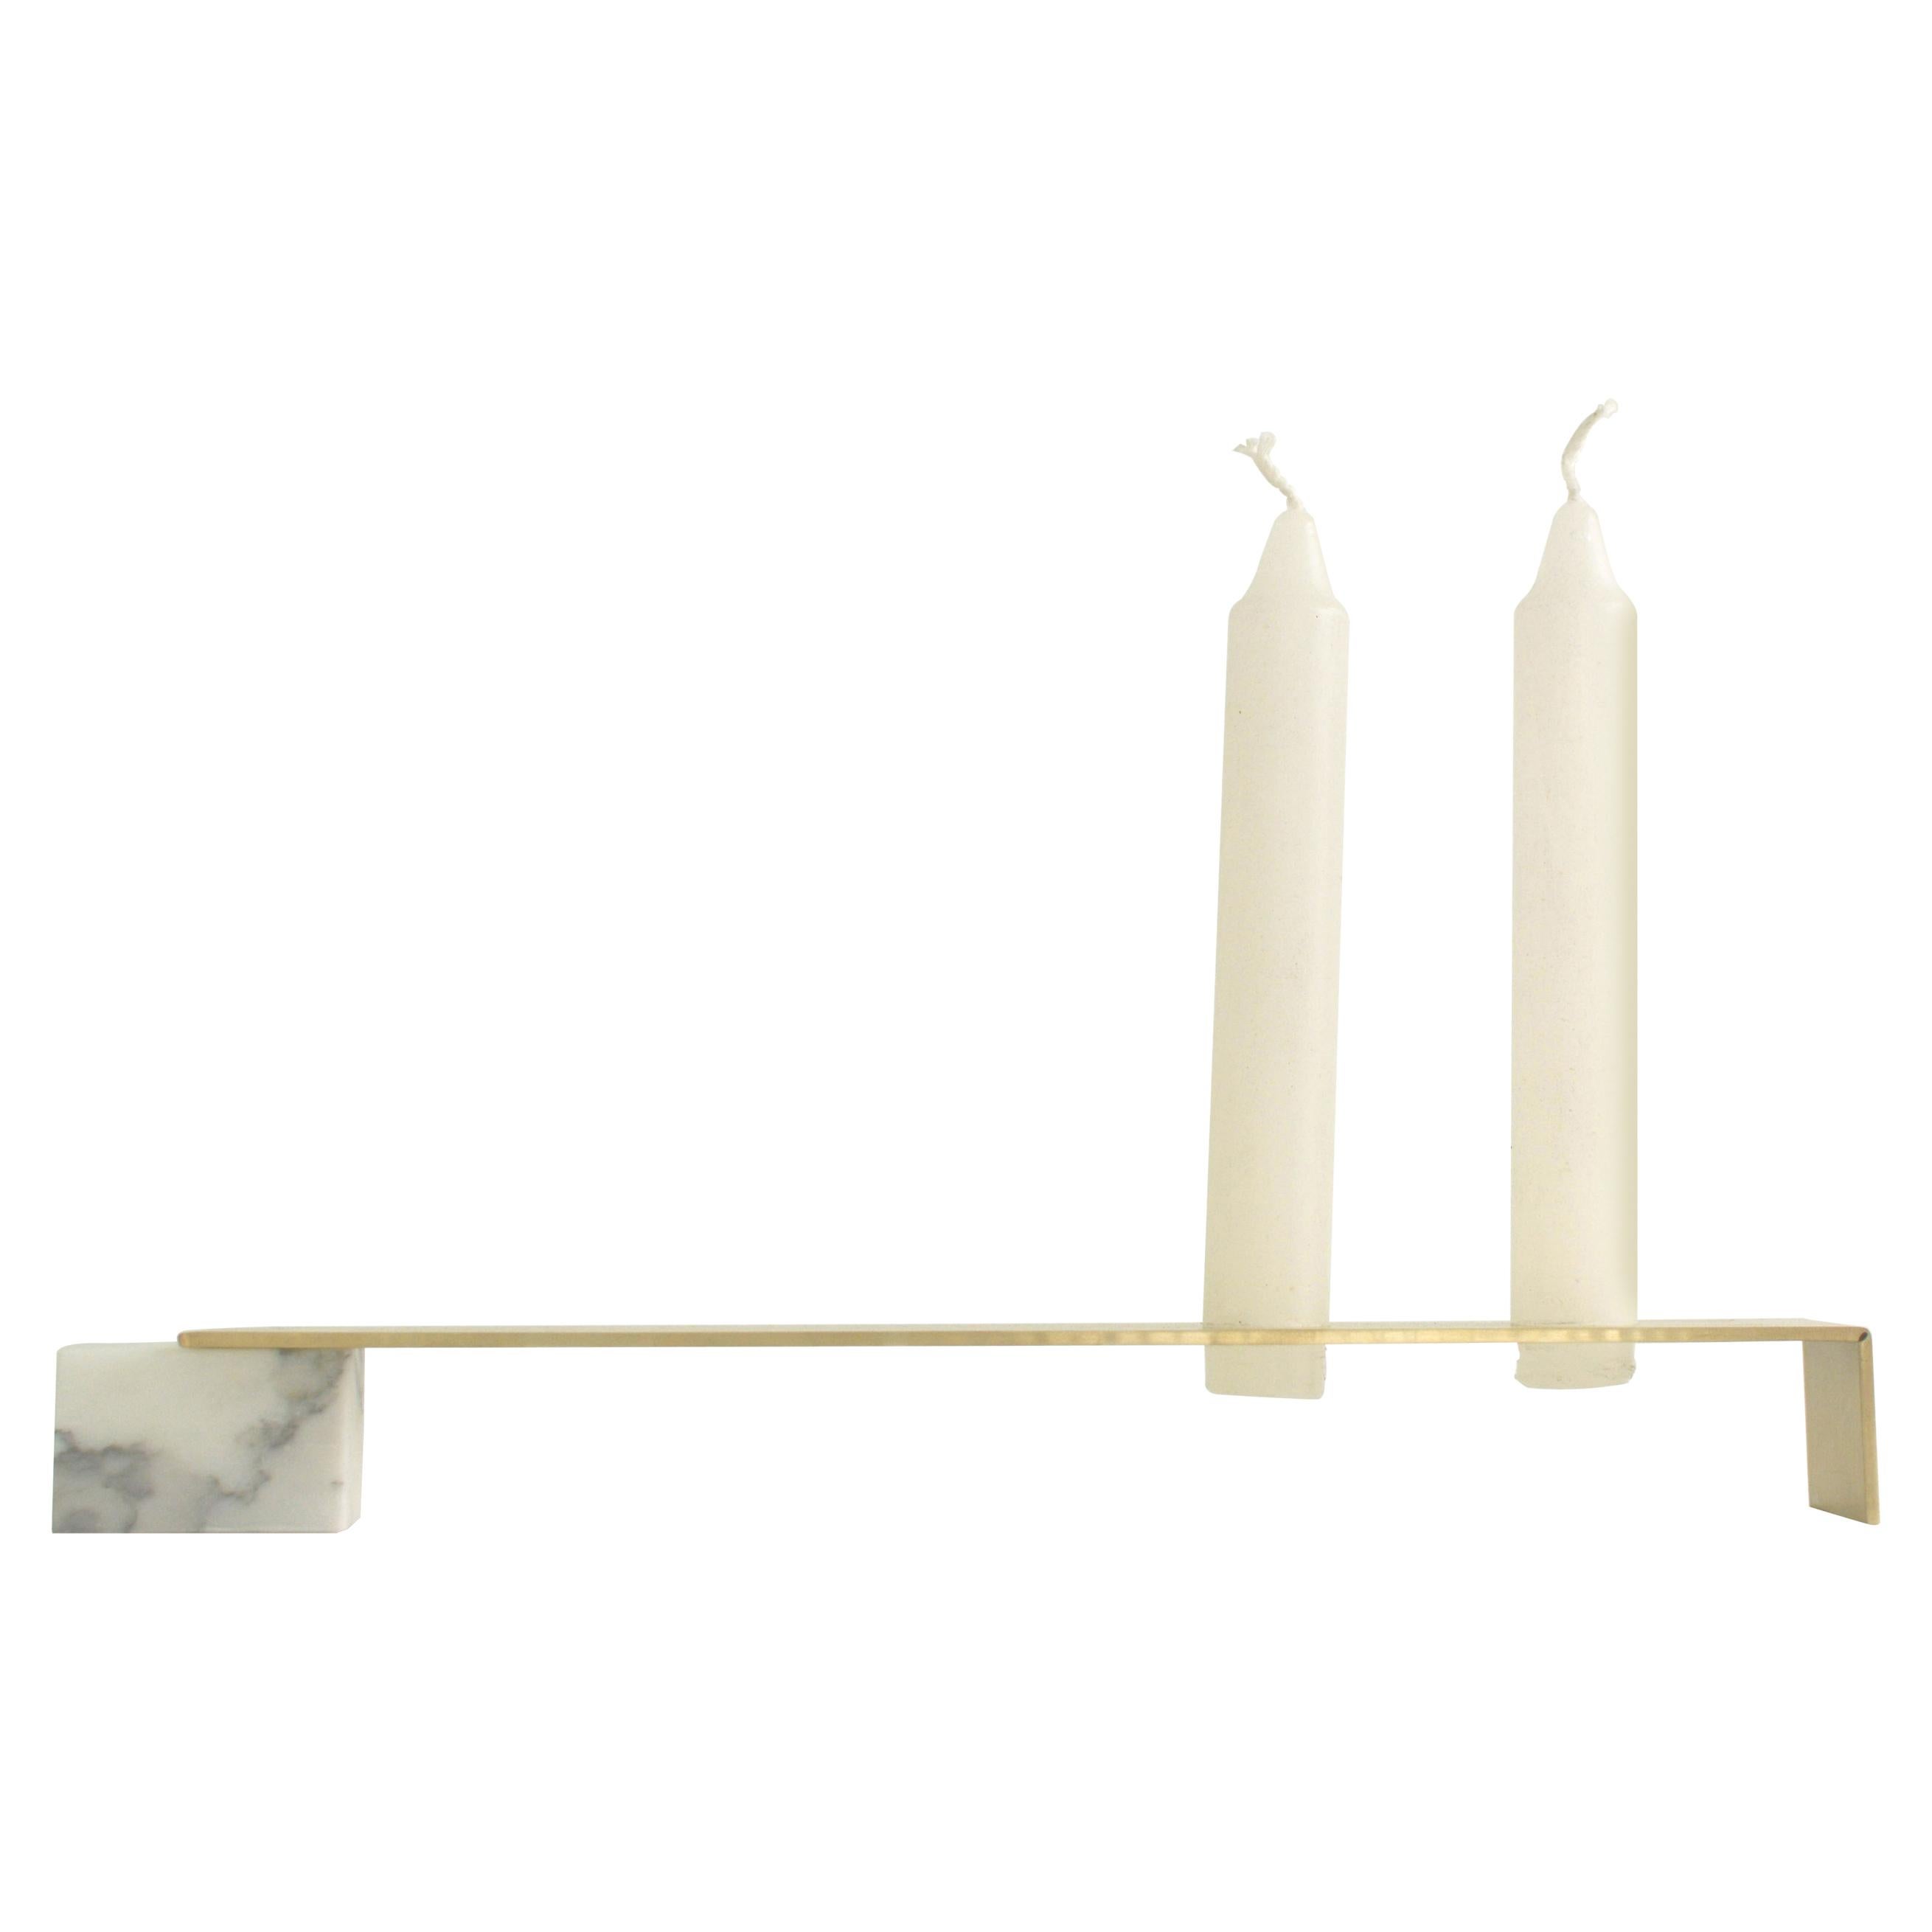 Unfolding marble candleholders by Periclis Frementitis
Edition of 5 pieces for 2021
Designer: Periclis Frementitis
Studio: HIGHDOTS
Dimensions: Width 28cm
Materials: brass, marble Carrara.



